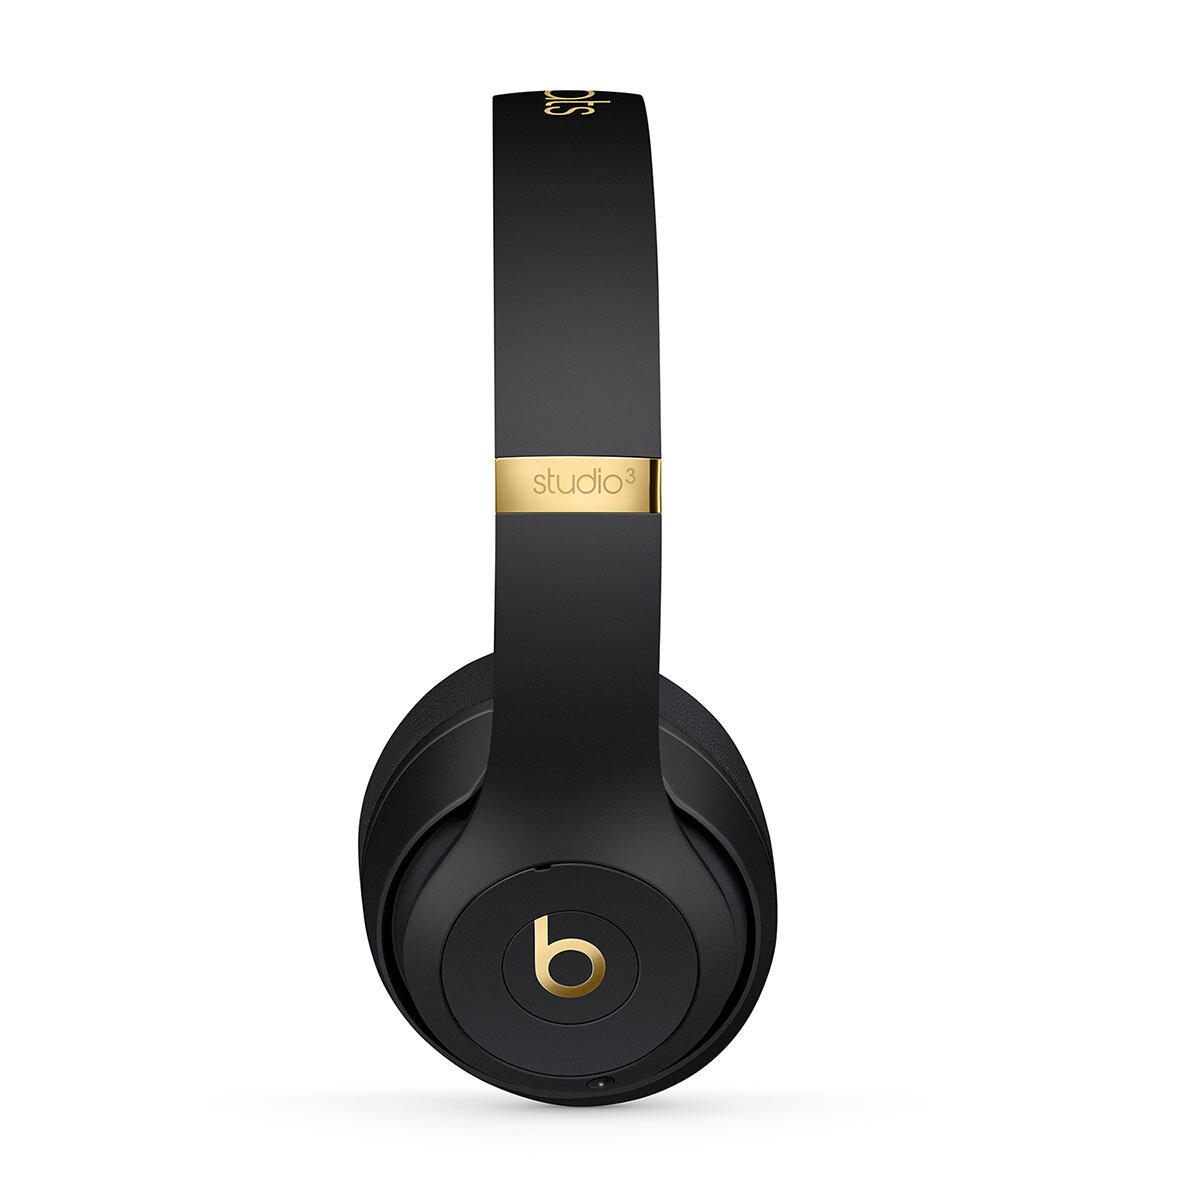 Buy Beats Studio3 Wireless Over-Ear Headphones – The Beats Skyline Collection in Midnight Black, MXJA2ZM/A at costco.co.uk